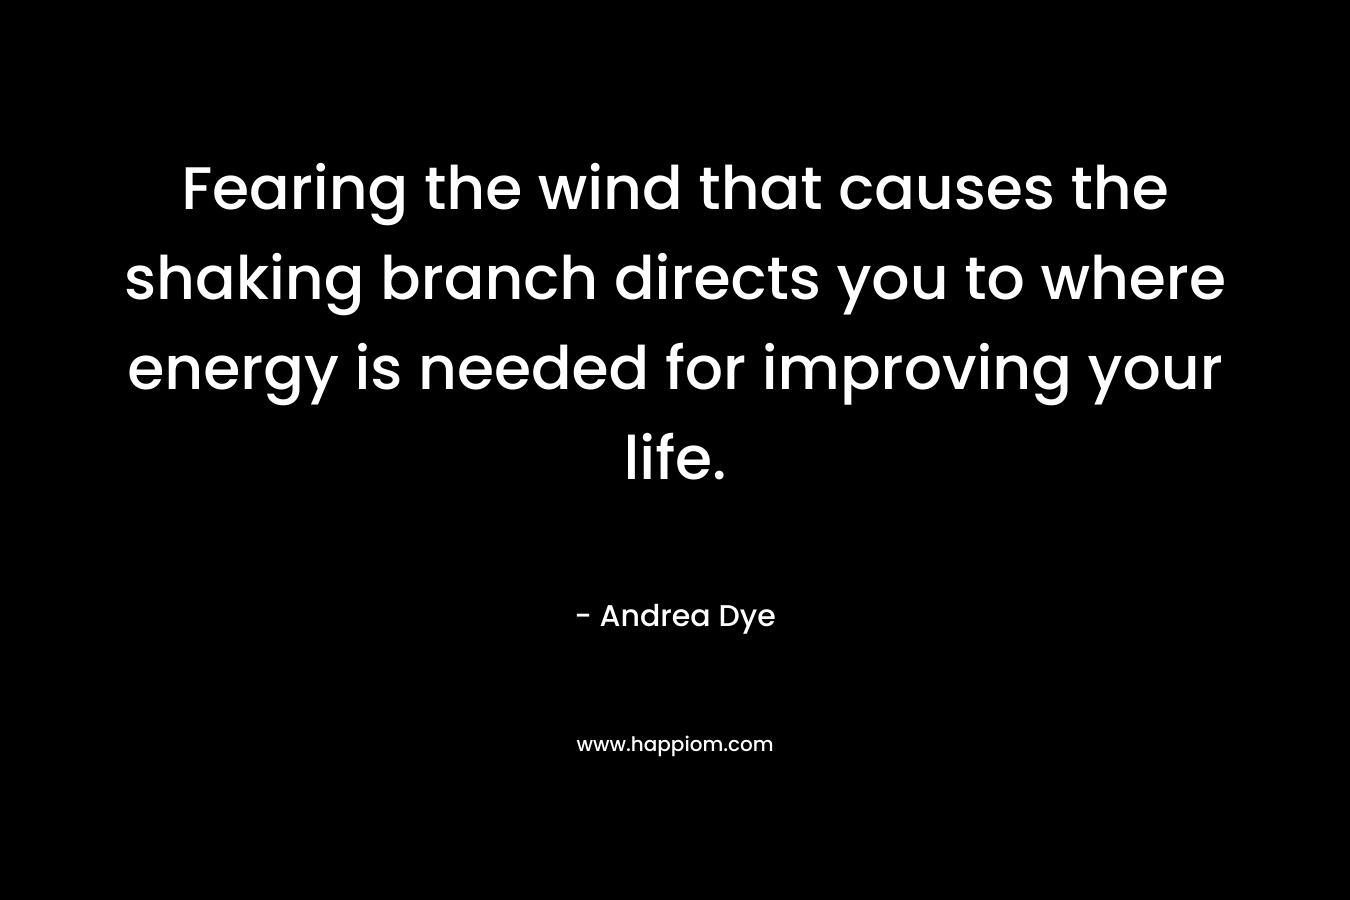 Fearing the wind that causes the shaking branch directs you to where energy is needed for improving your life. – Andrea Dye